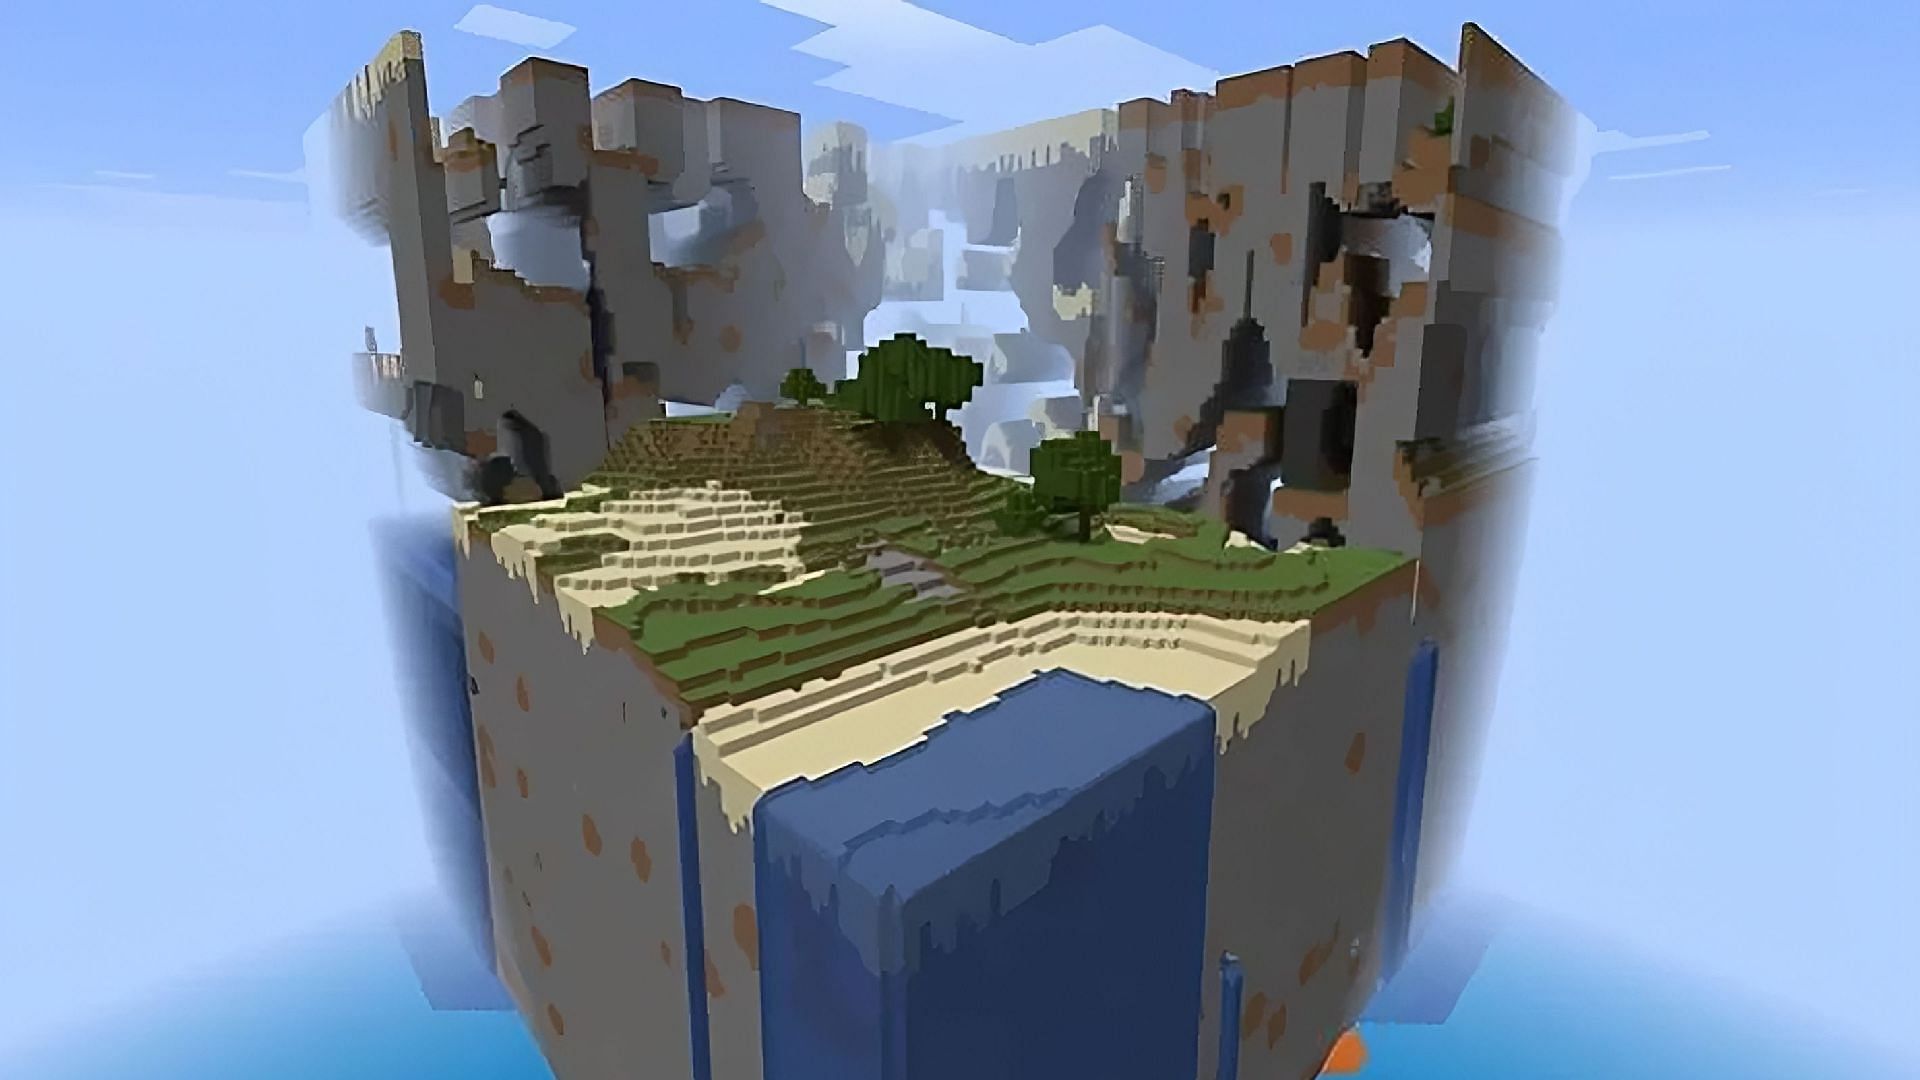 Streamer clips through Minecraft terrain after reaching the edge of the map (Image via Planet Minecraft)